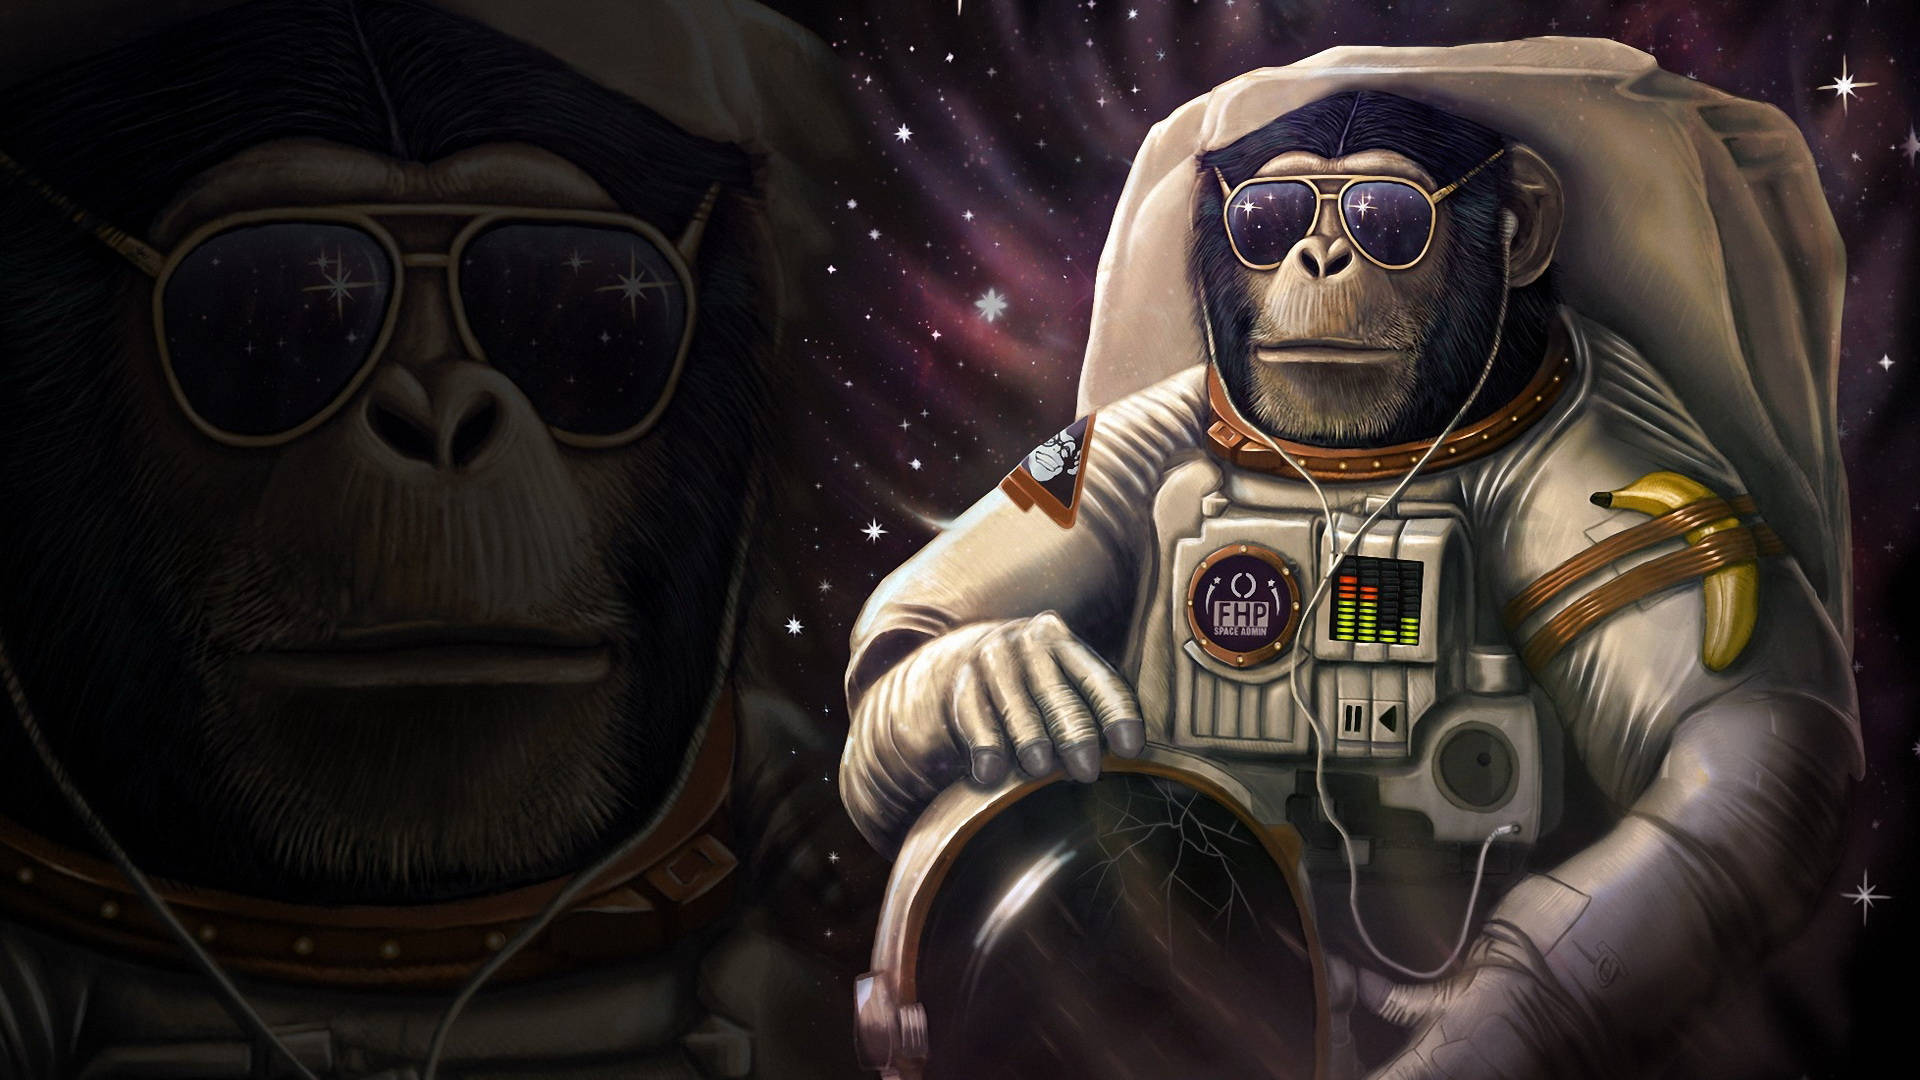 A Funny Monkey Astronaut In Space